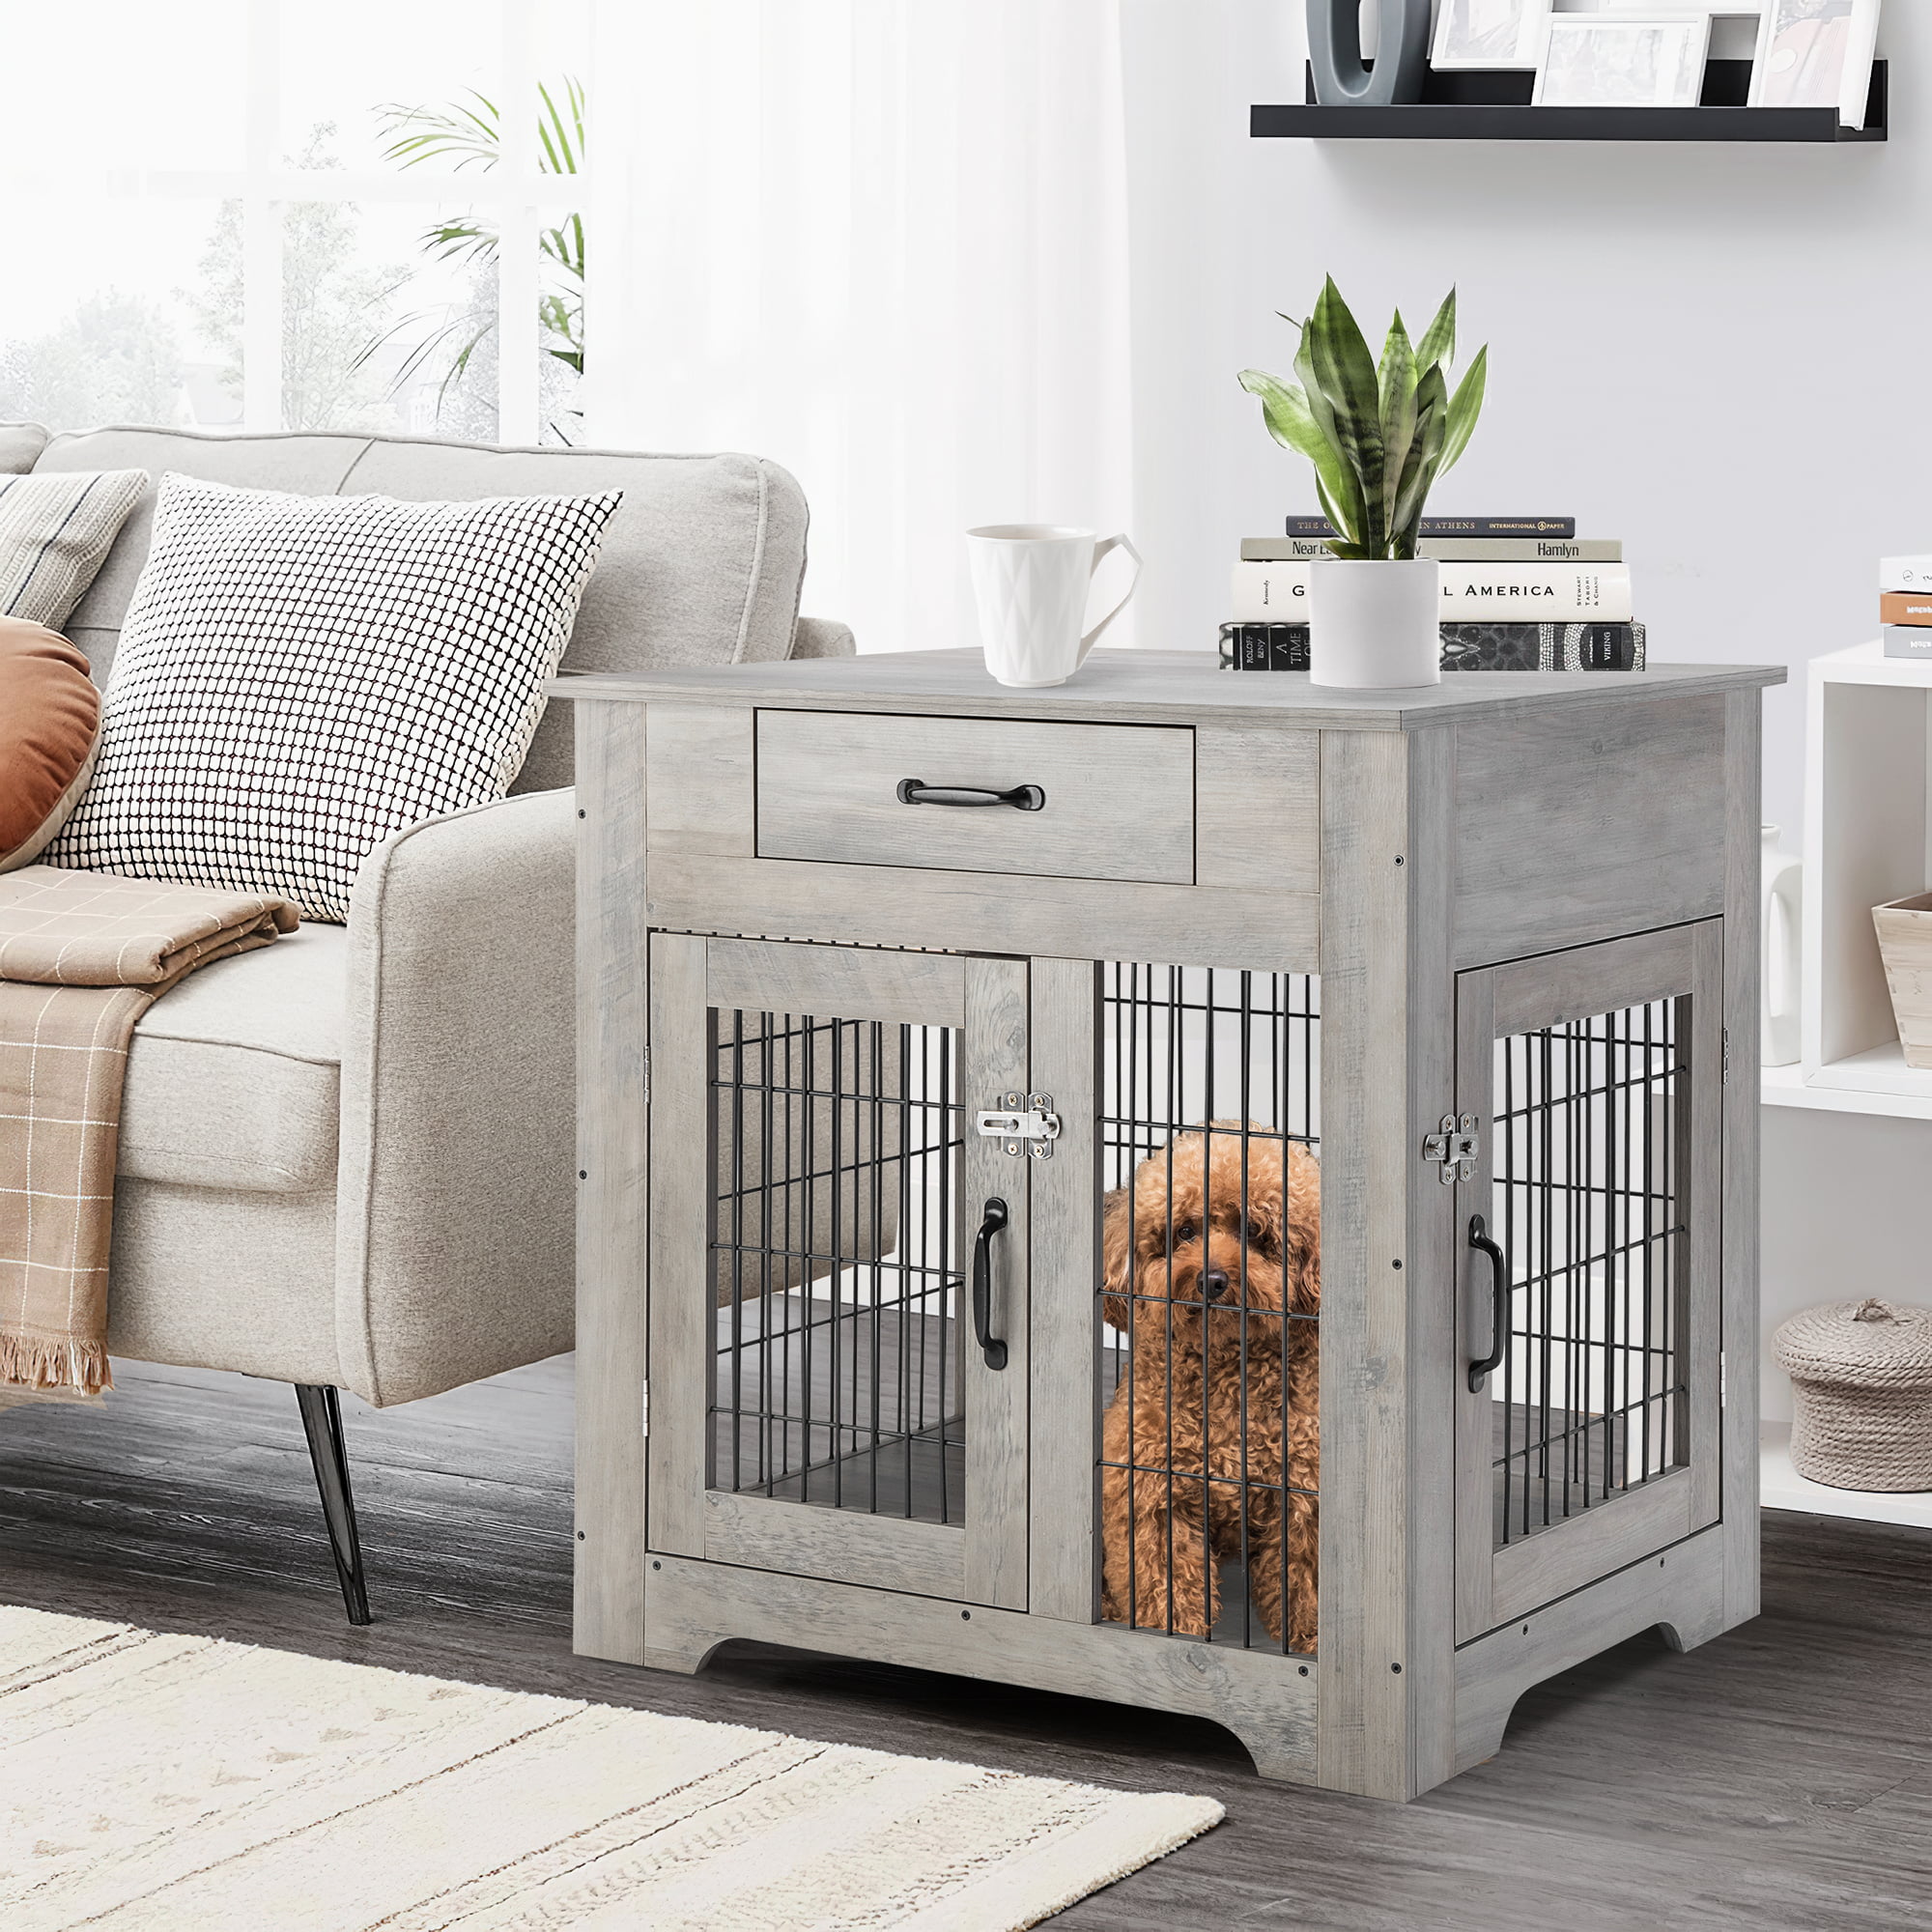 Tucker Murphy Pet™ Furniture Style Dog Crate End Table, Wooden Dog Kennel  With Double Doors, Dog House For Small Medium Dog Indoor Use, 0666 &  Reviews